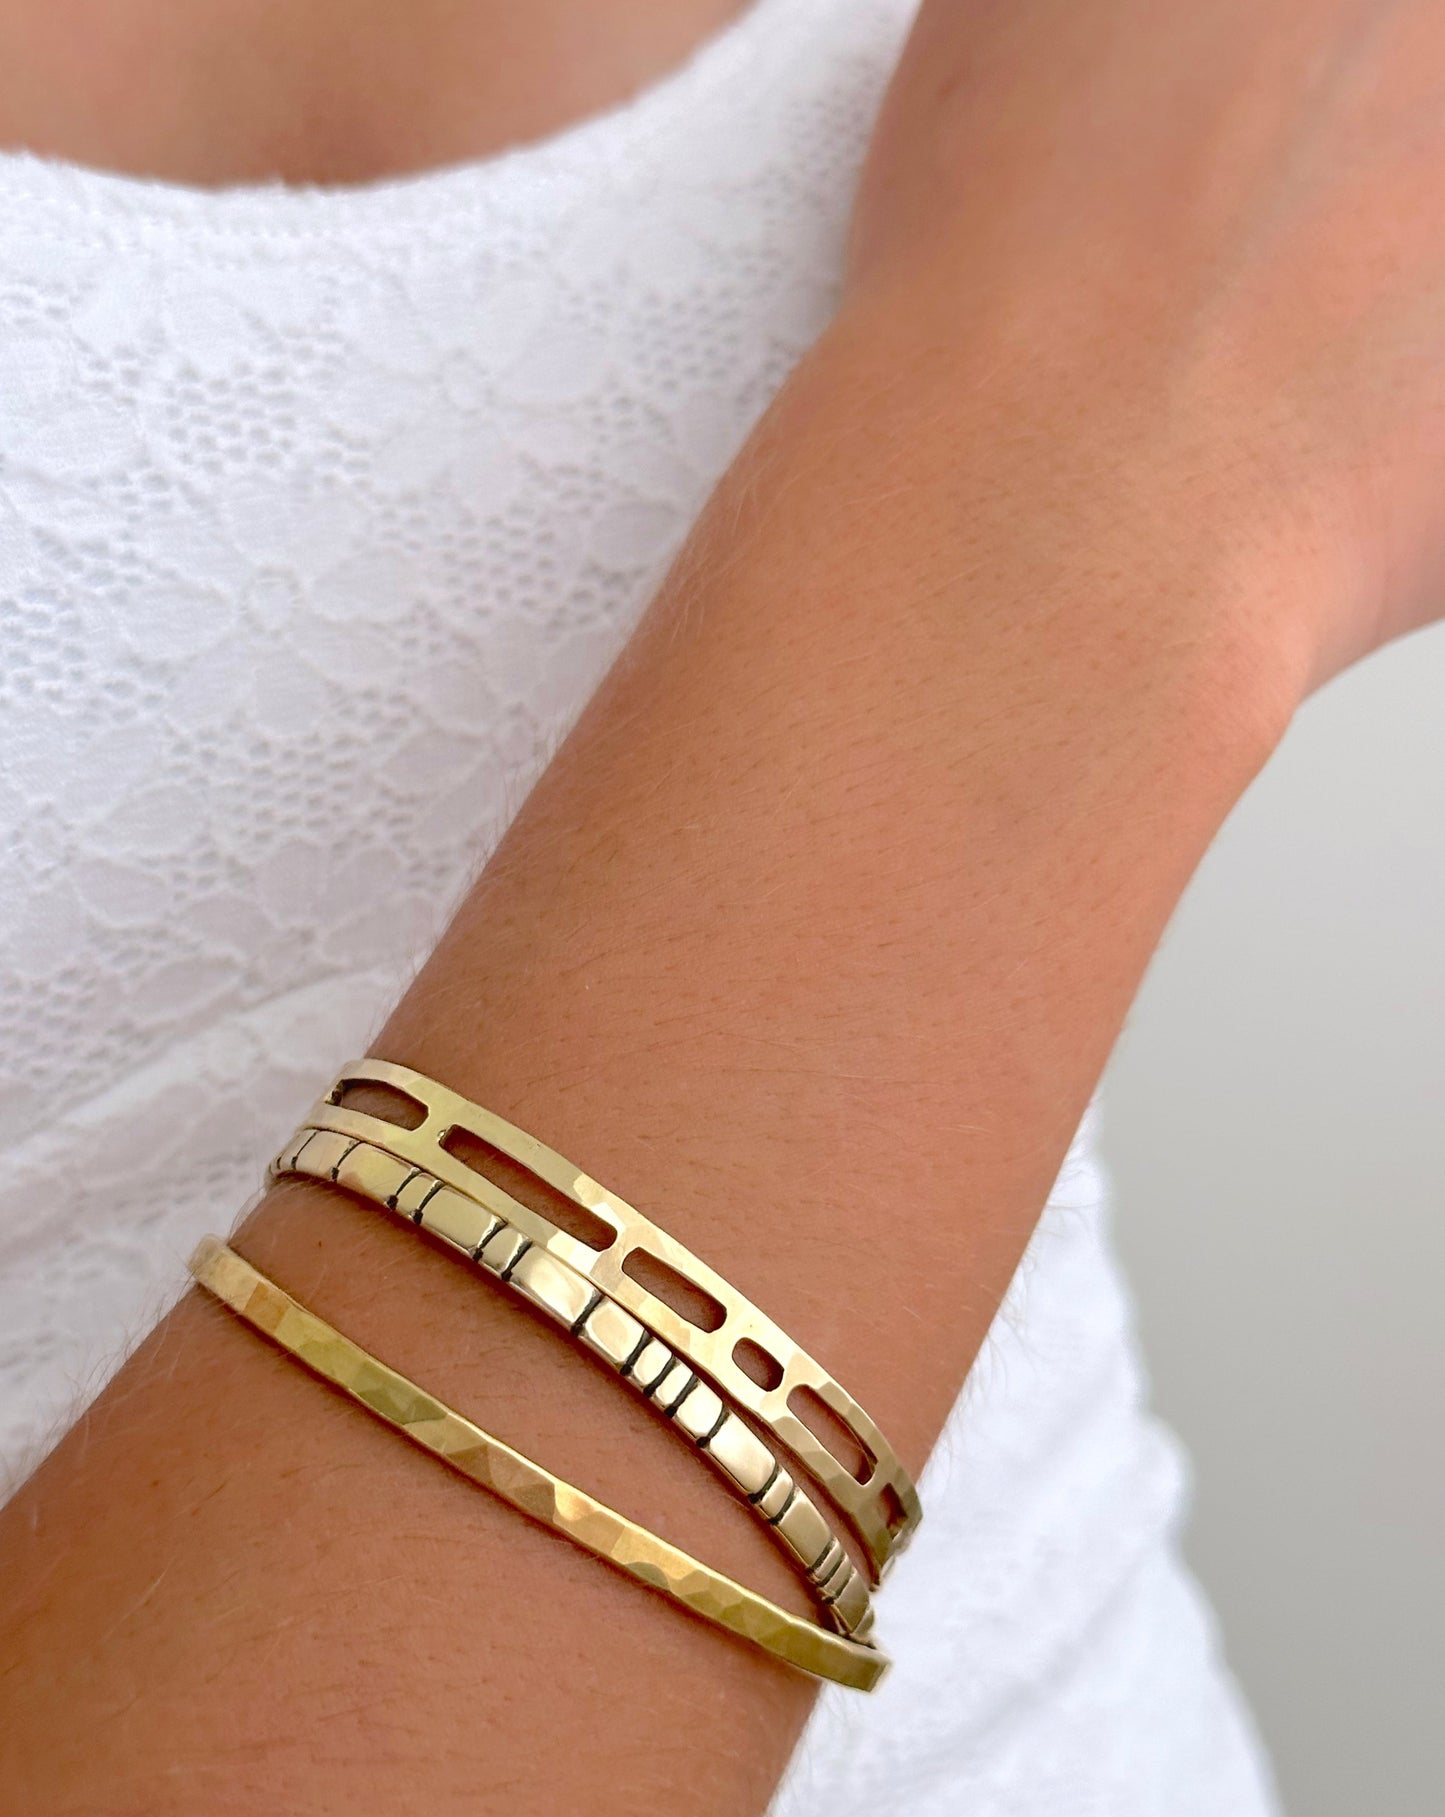 Woman wearing various styles of gold cuff bracelets.